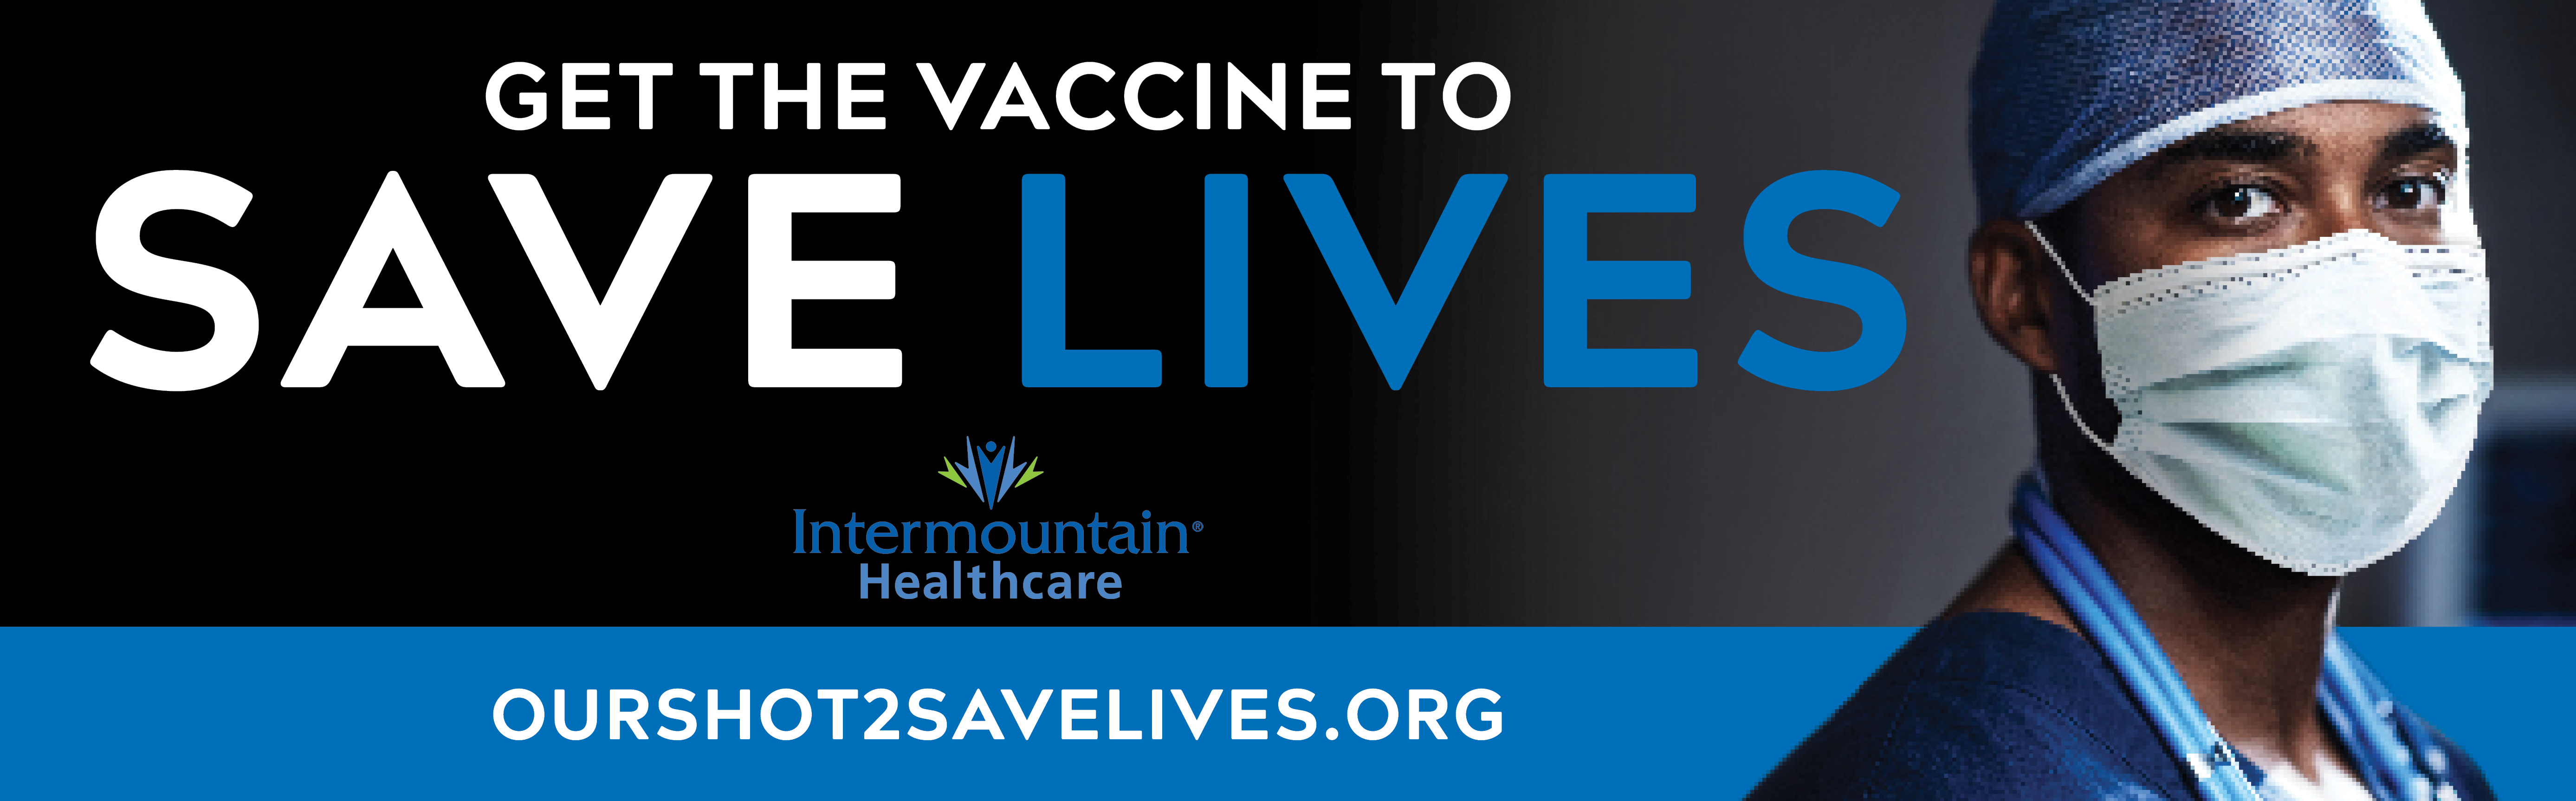 Get the Vaccine to Save Lives 1